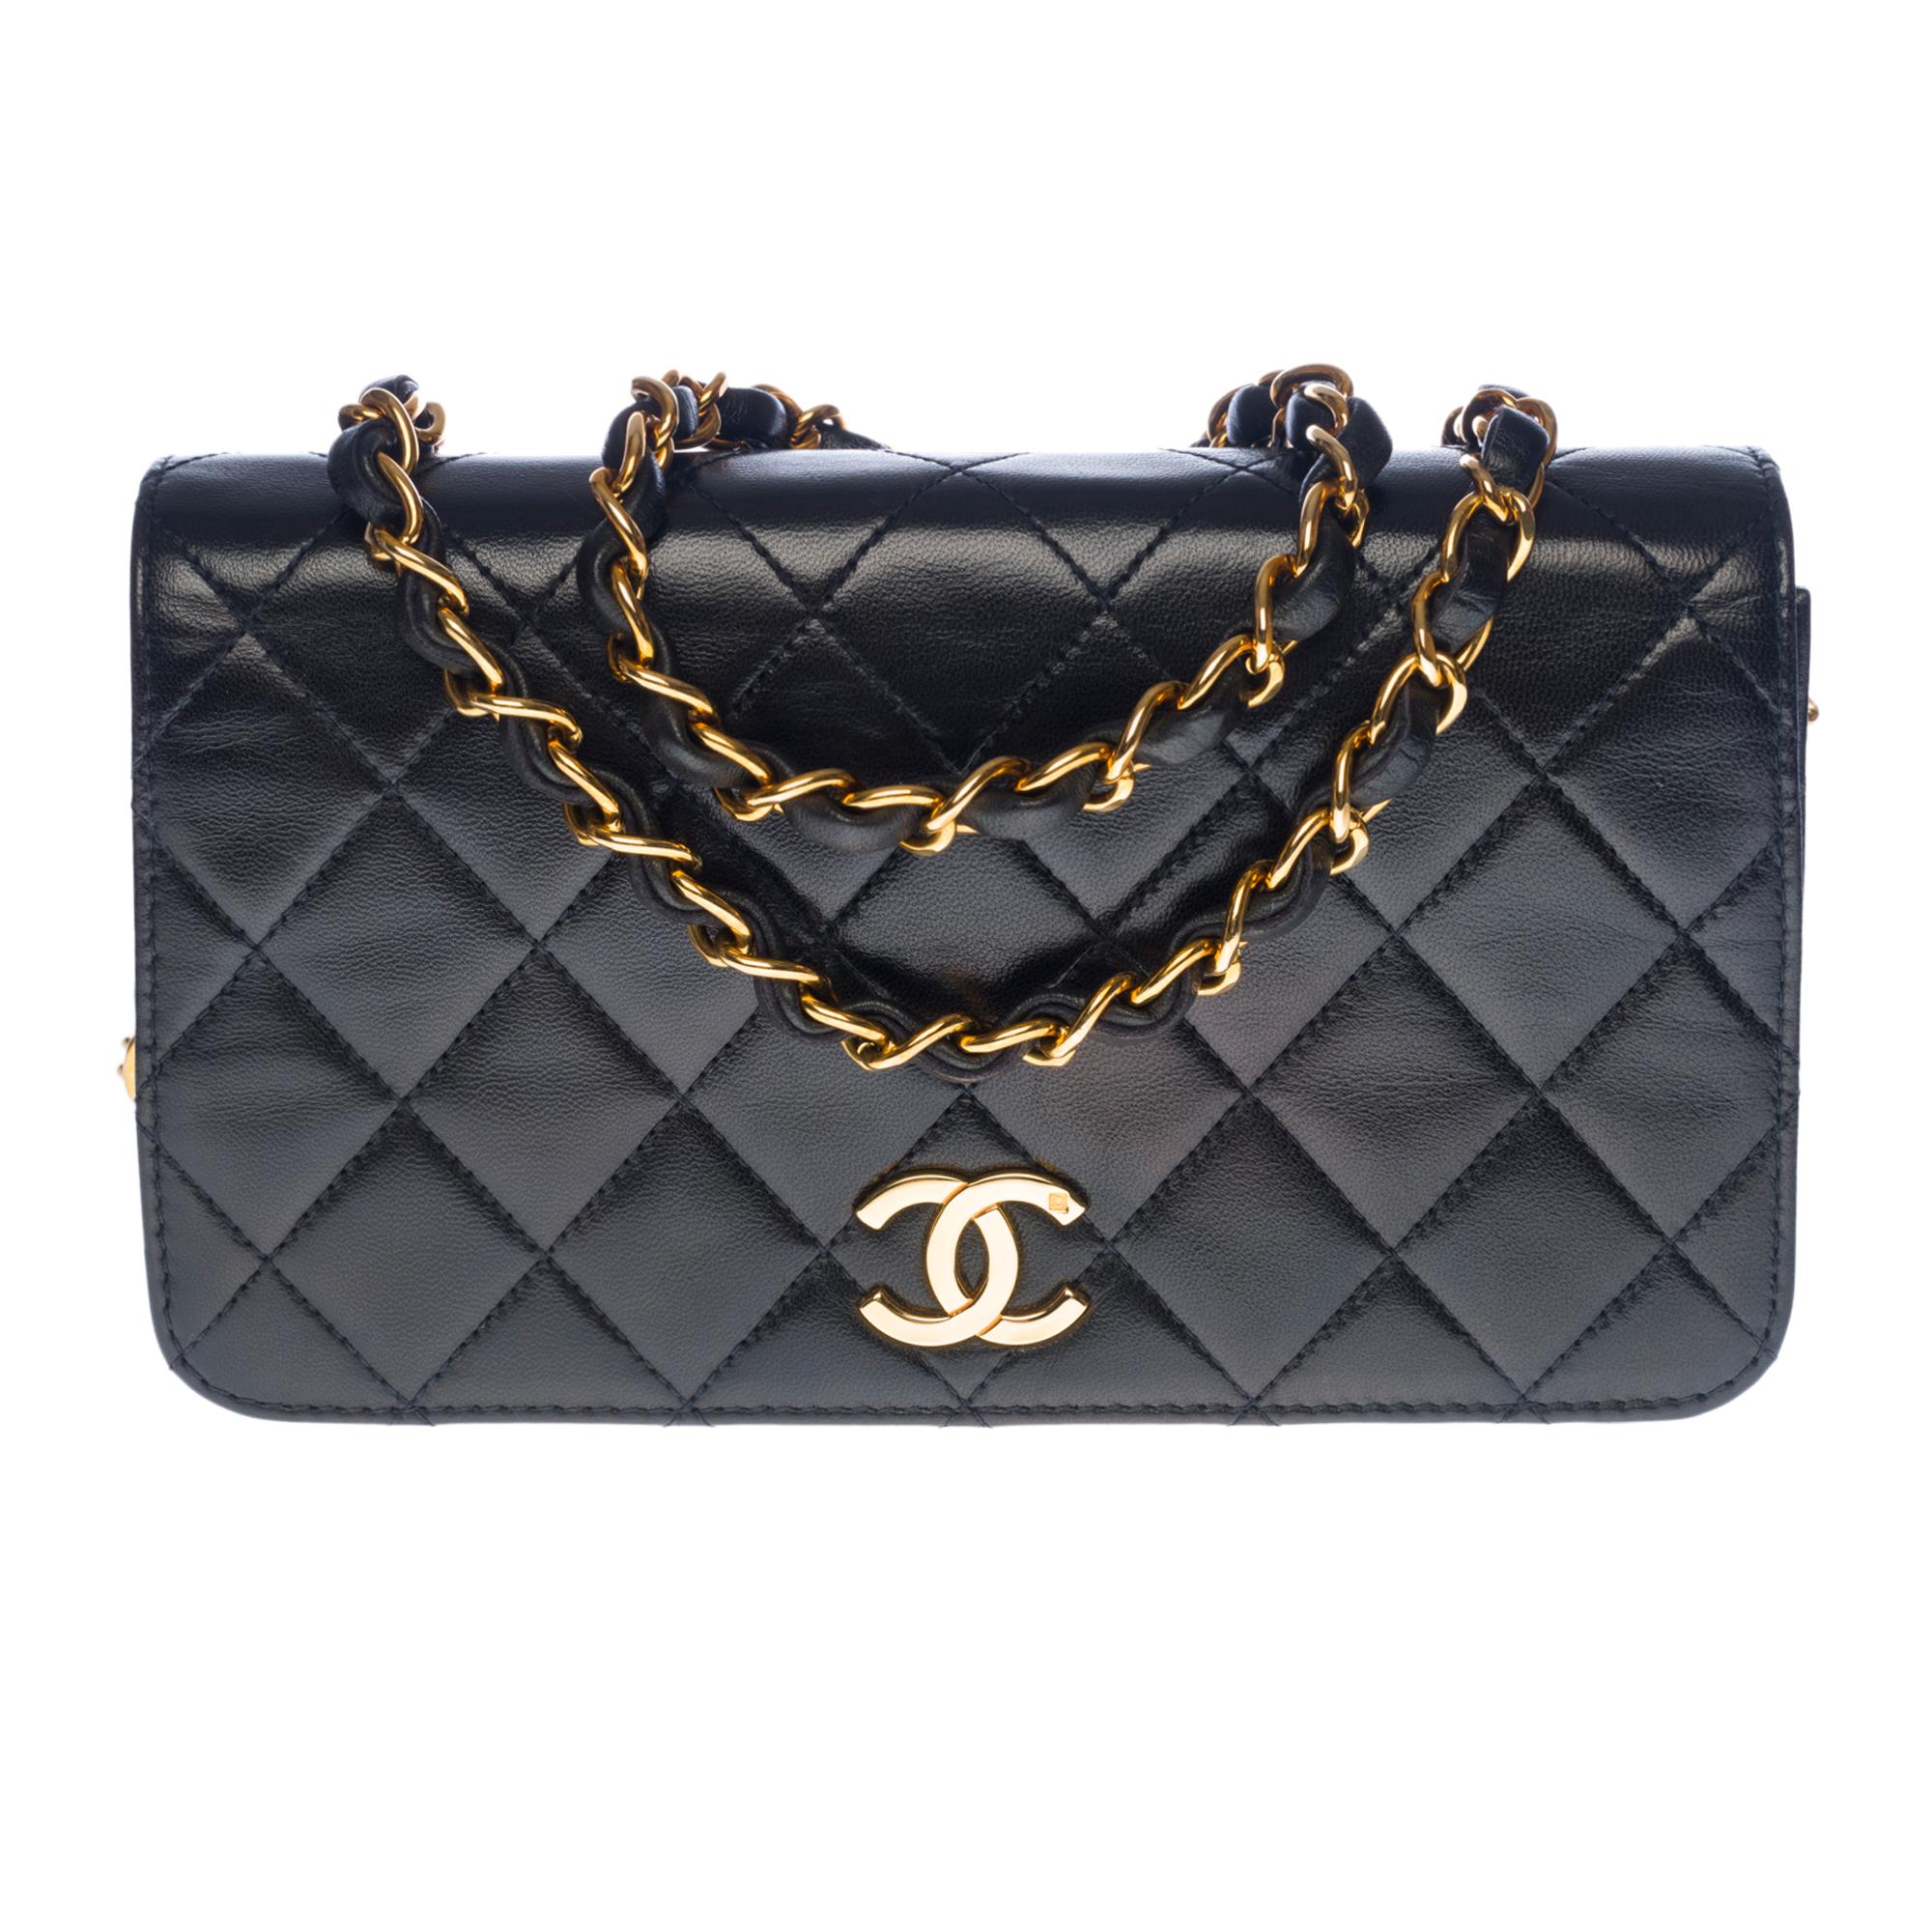 Charming Chanel Full Flap Mini handbag in black quilted lambskin leather, gold-tone hardware, a gold-tone metal chain handle interlaced with black leather for shoulder and shoulder strap support
Flap closure, gold-plated CC stud clasp
Bordeaux